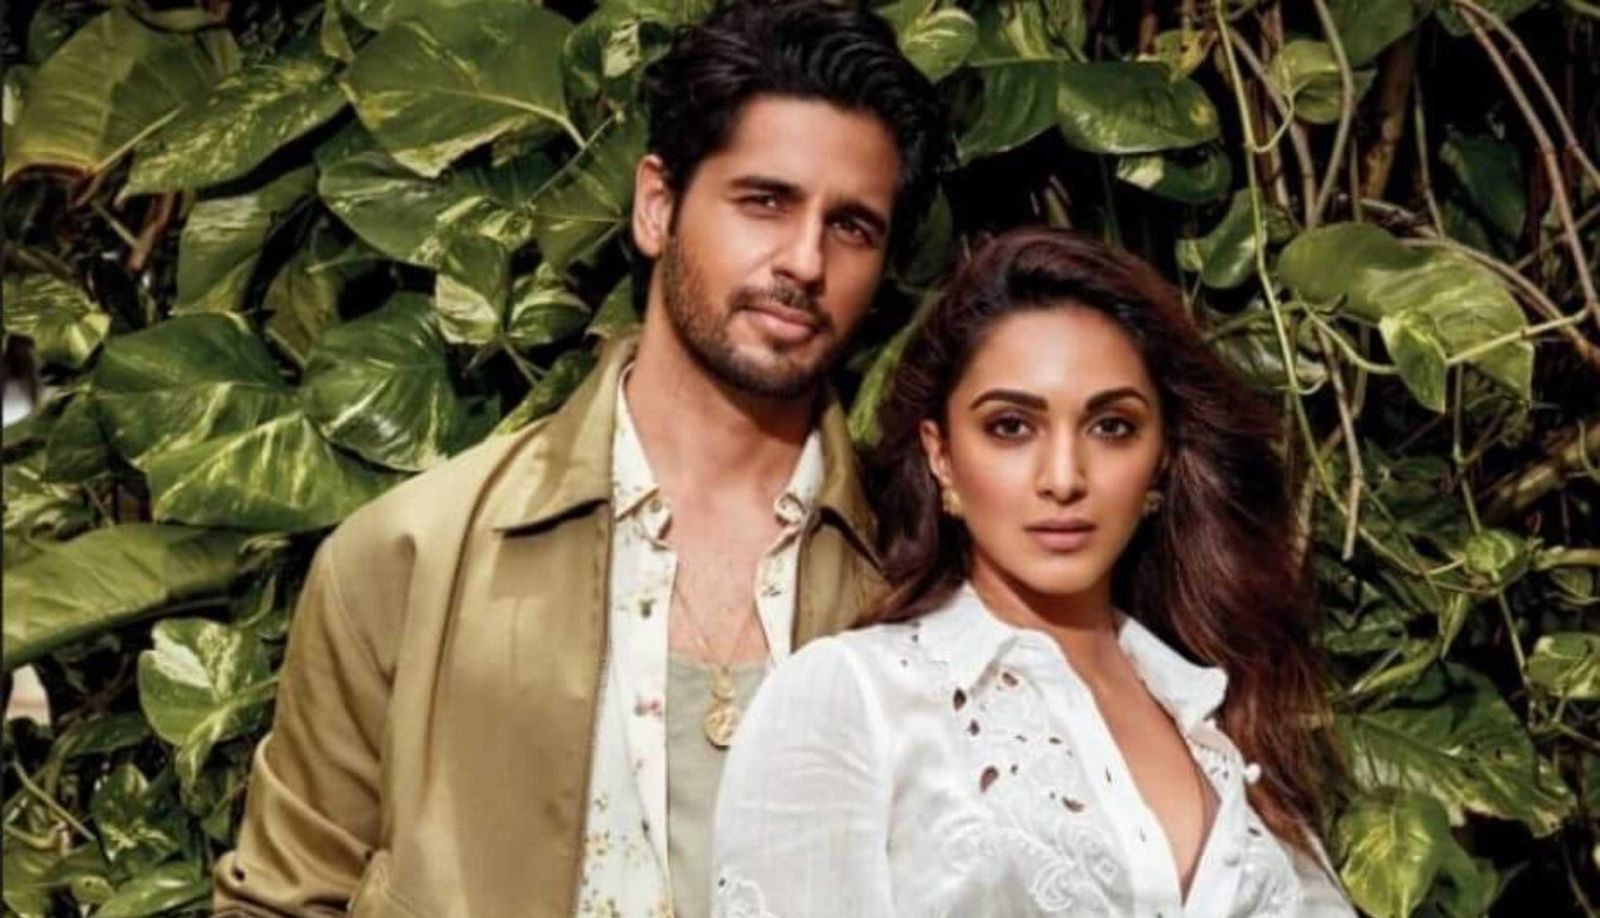 Sidharth Malhotra and Kiara Advani have begun wedding prep; here’s when they plan to tie the knot